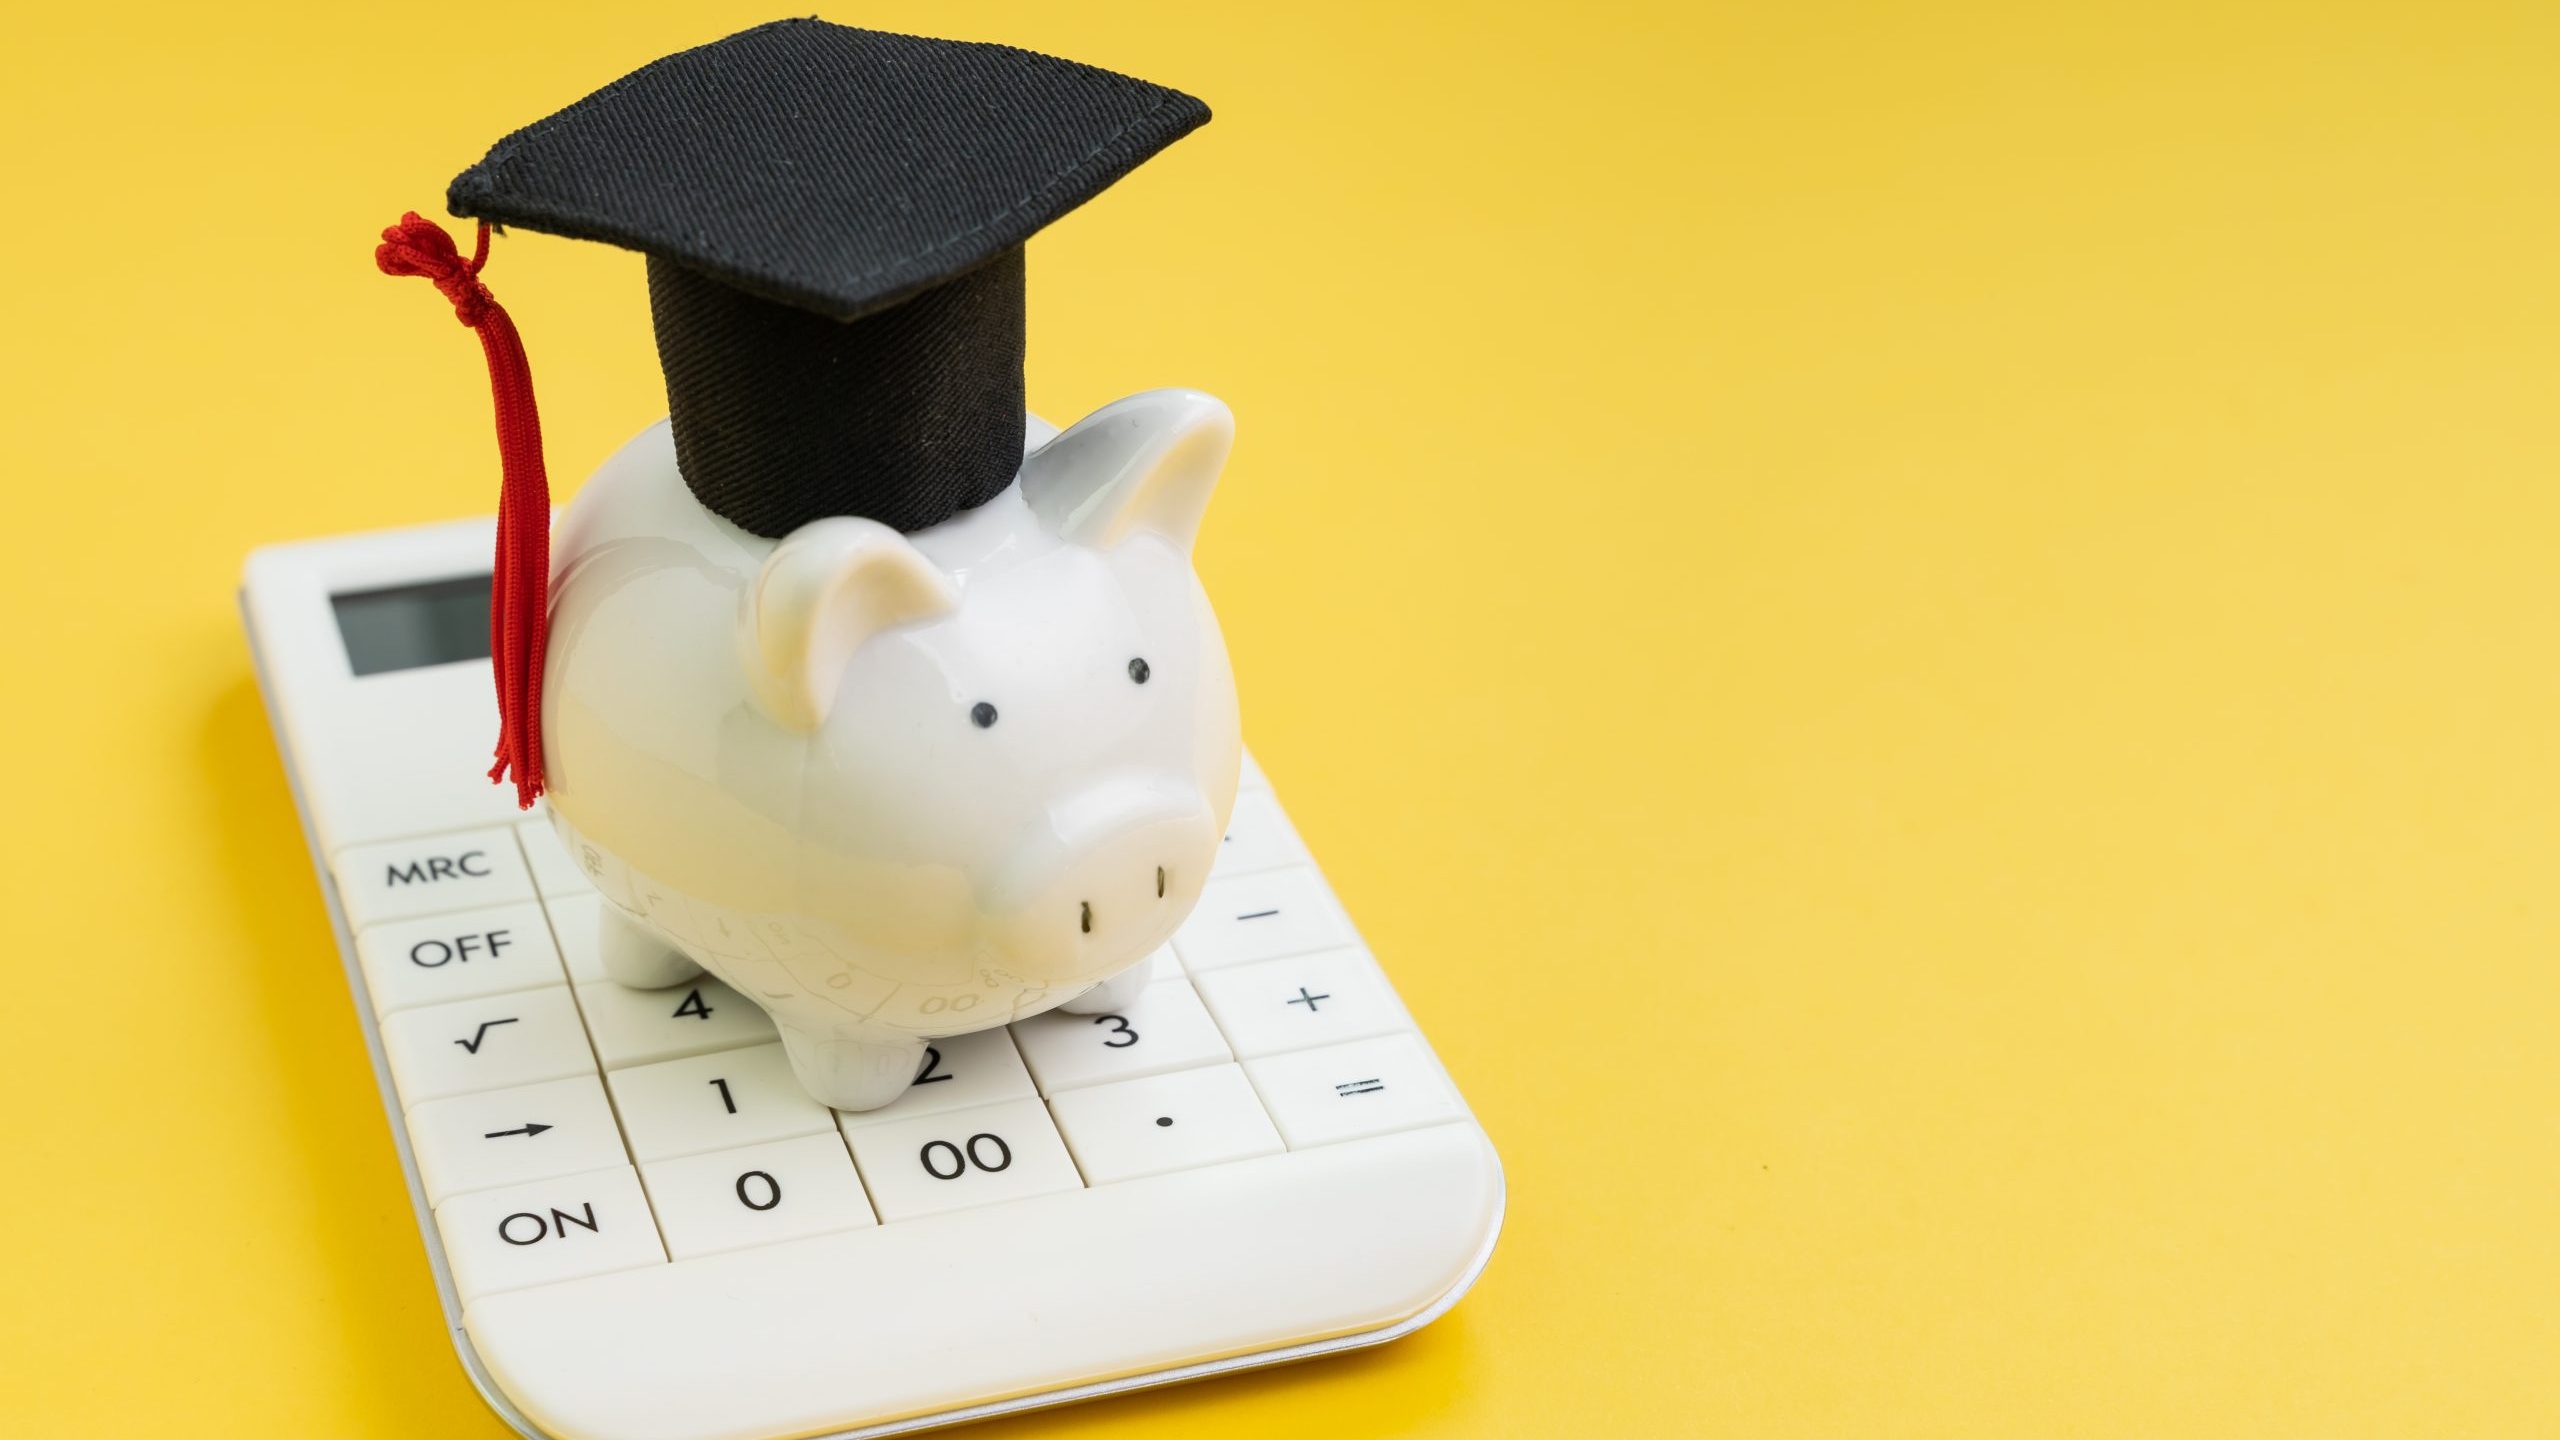 Student loan payment calculation, scholarship or saving for school and education concept, white piggy bank wearing graduation hat on calculator on yellow background with copy space.